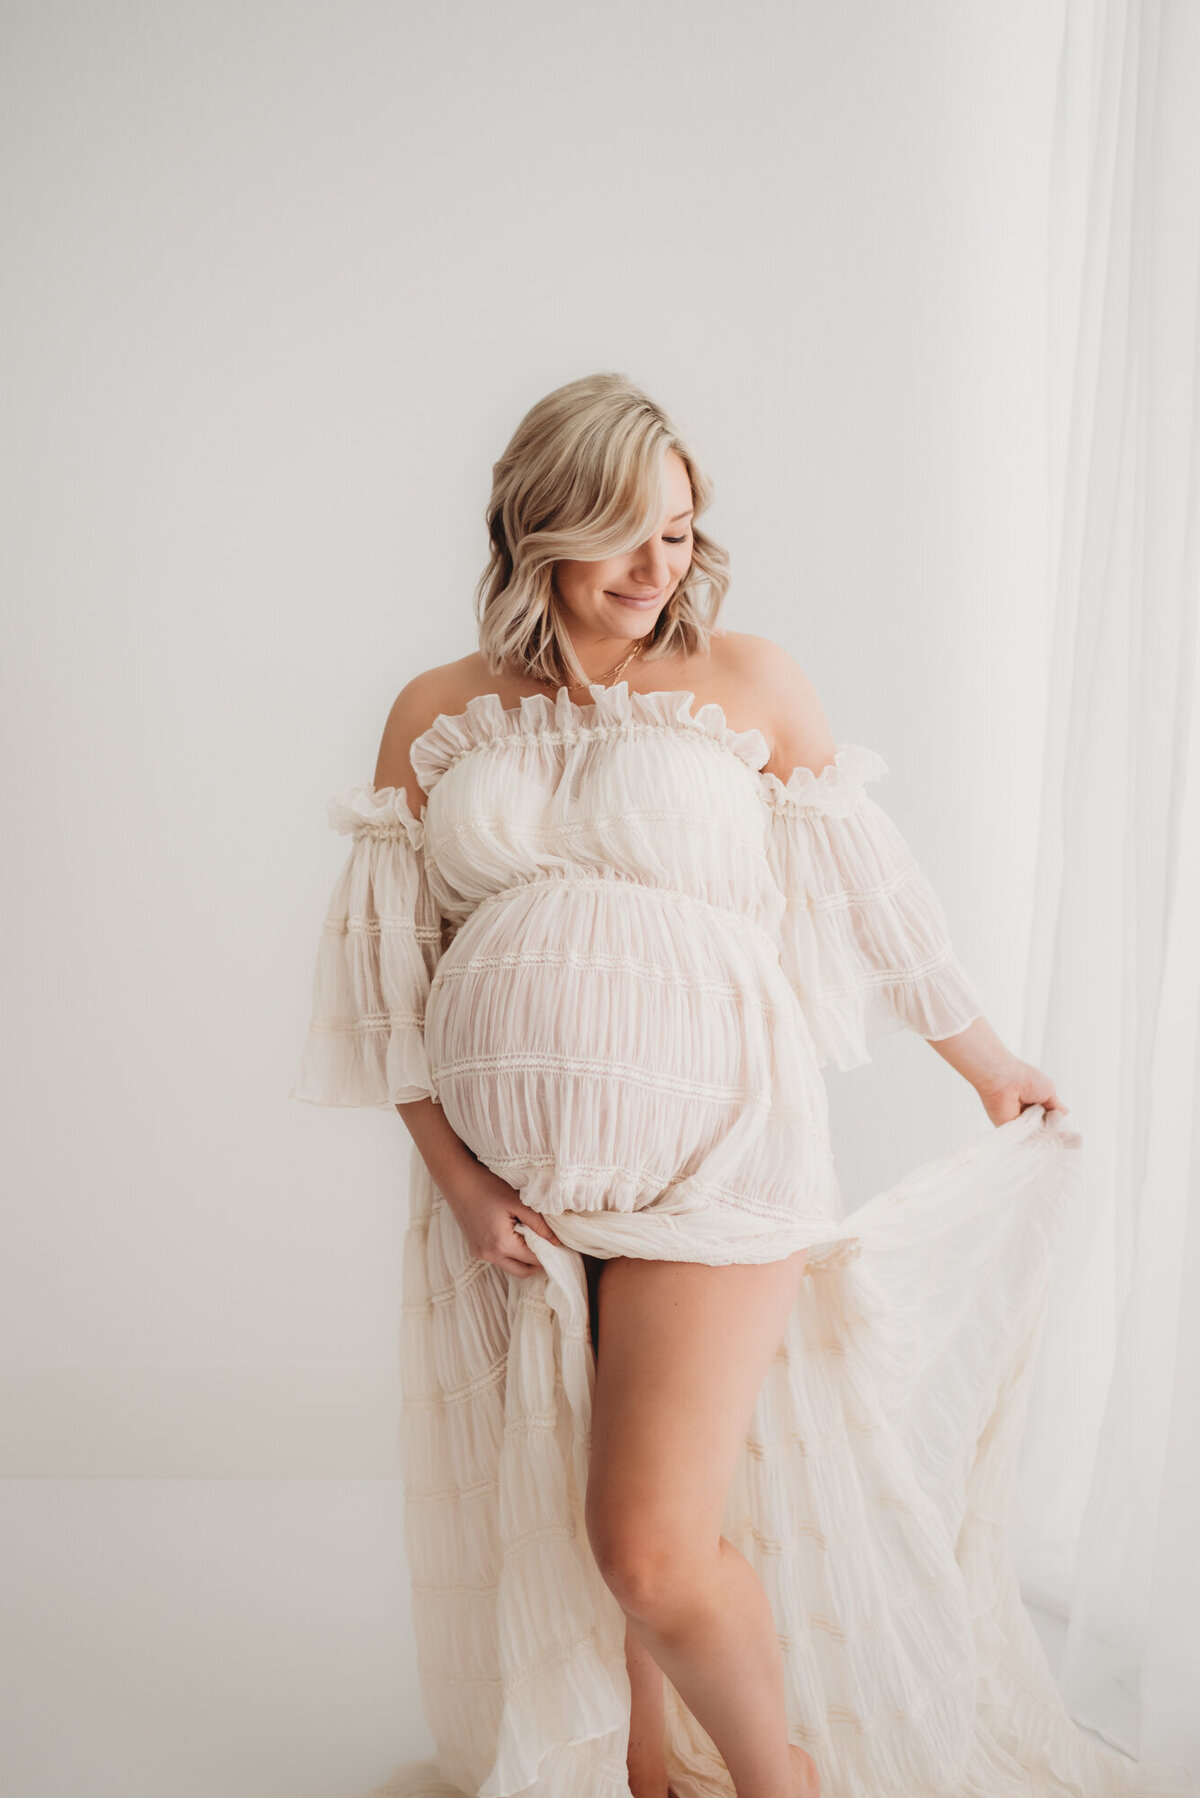 denver maternity photo session with pregnant woman in white dress showing leg